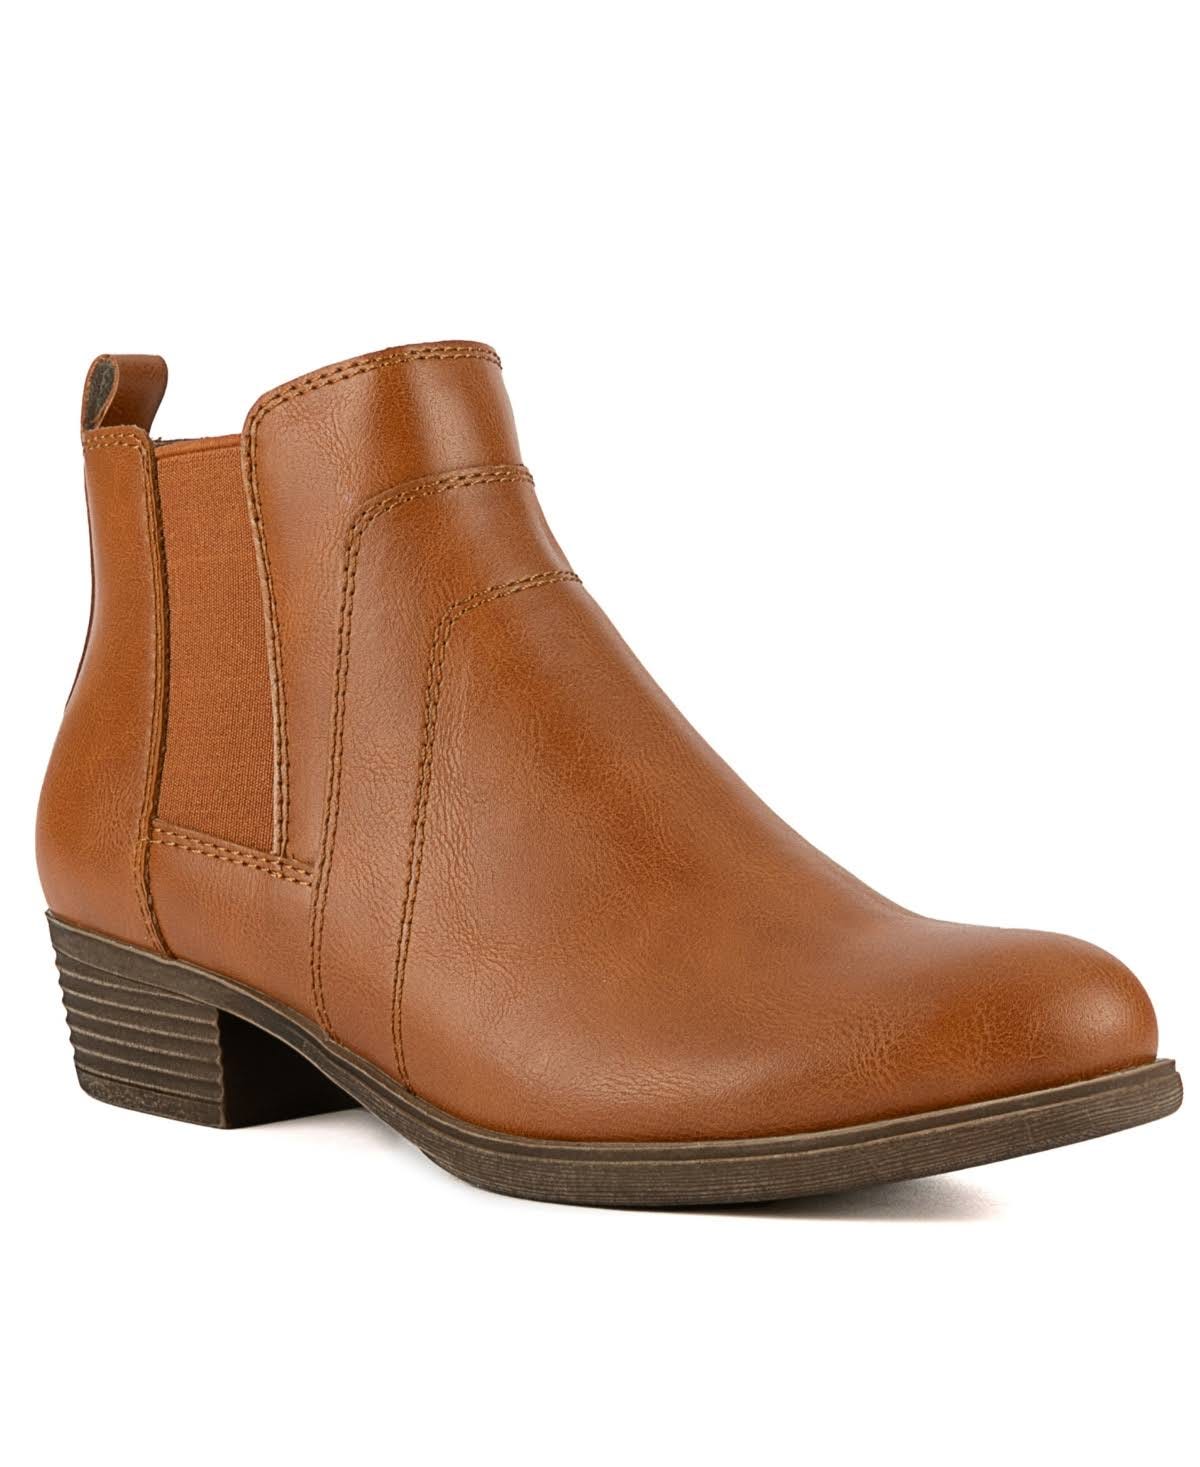 Stylish Tan Ankle Booties for Women | Image